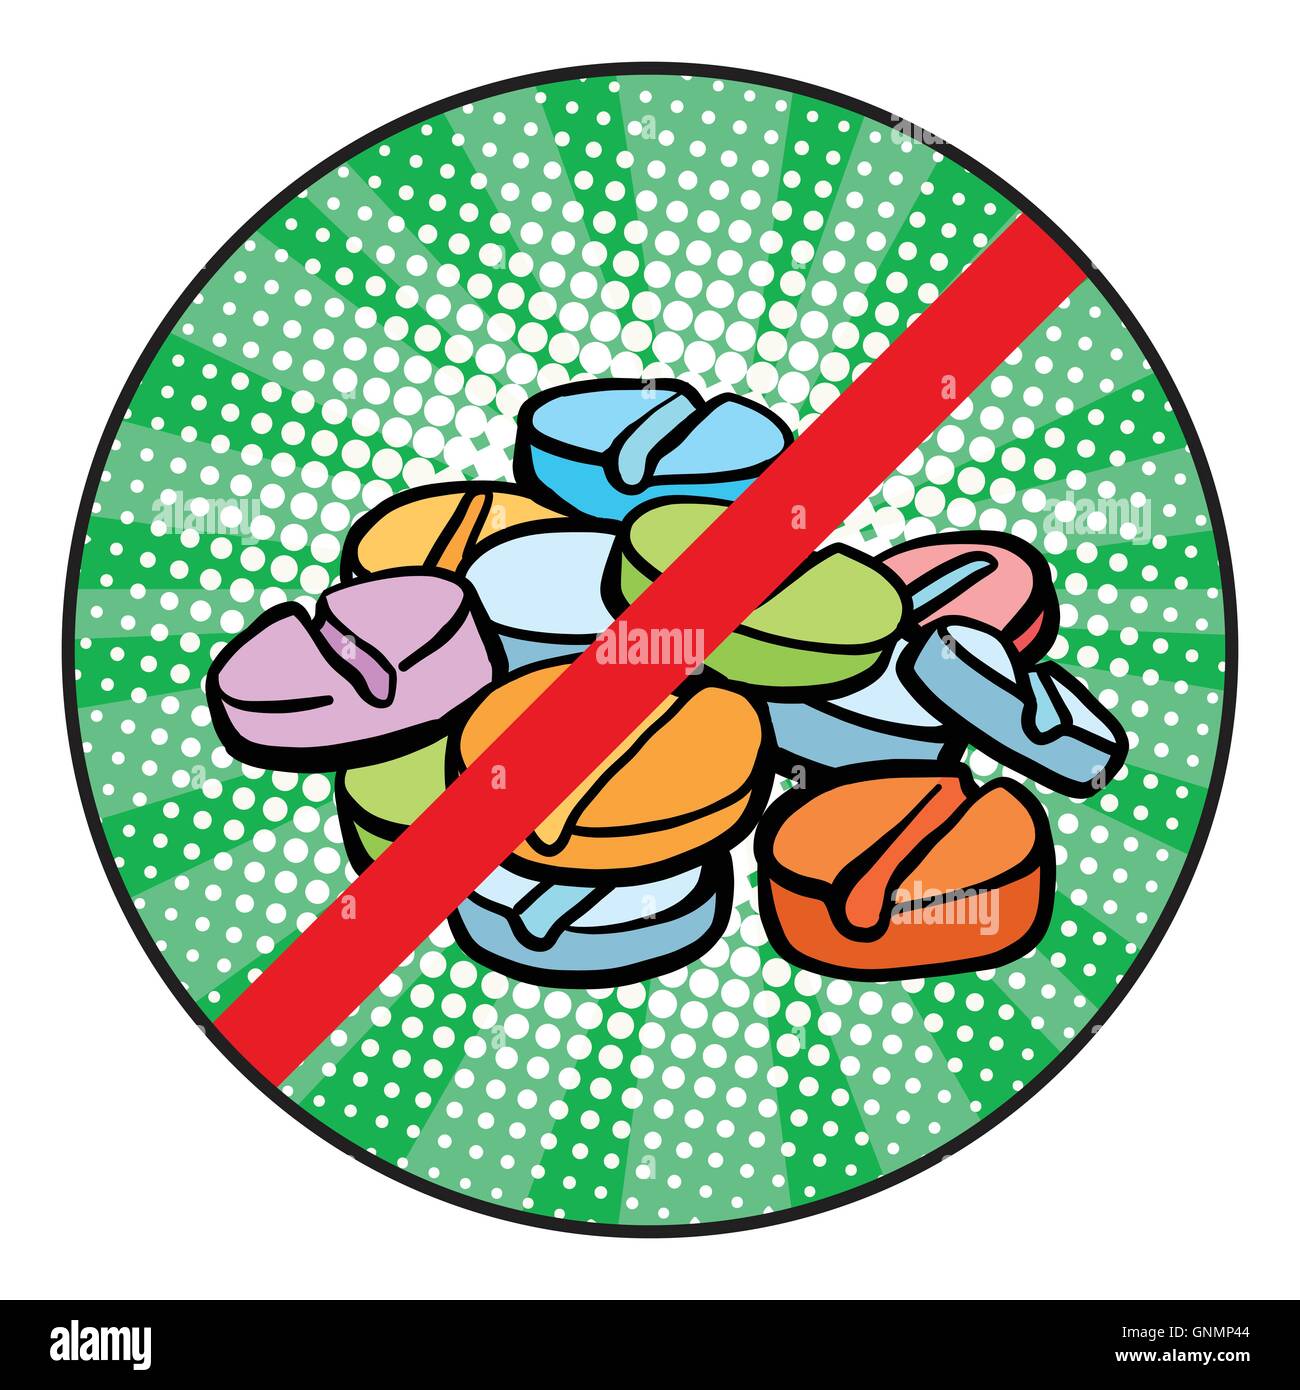 Stop doping sign icon Stock Vector